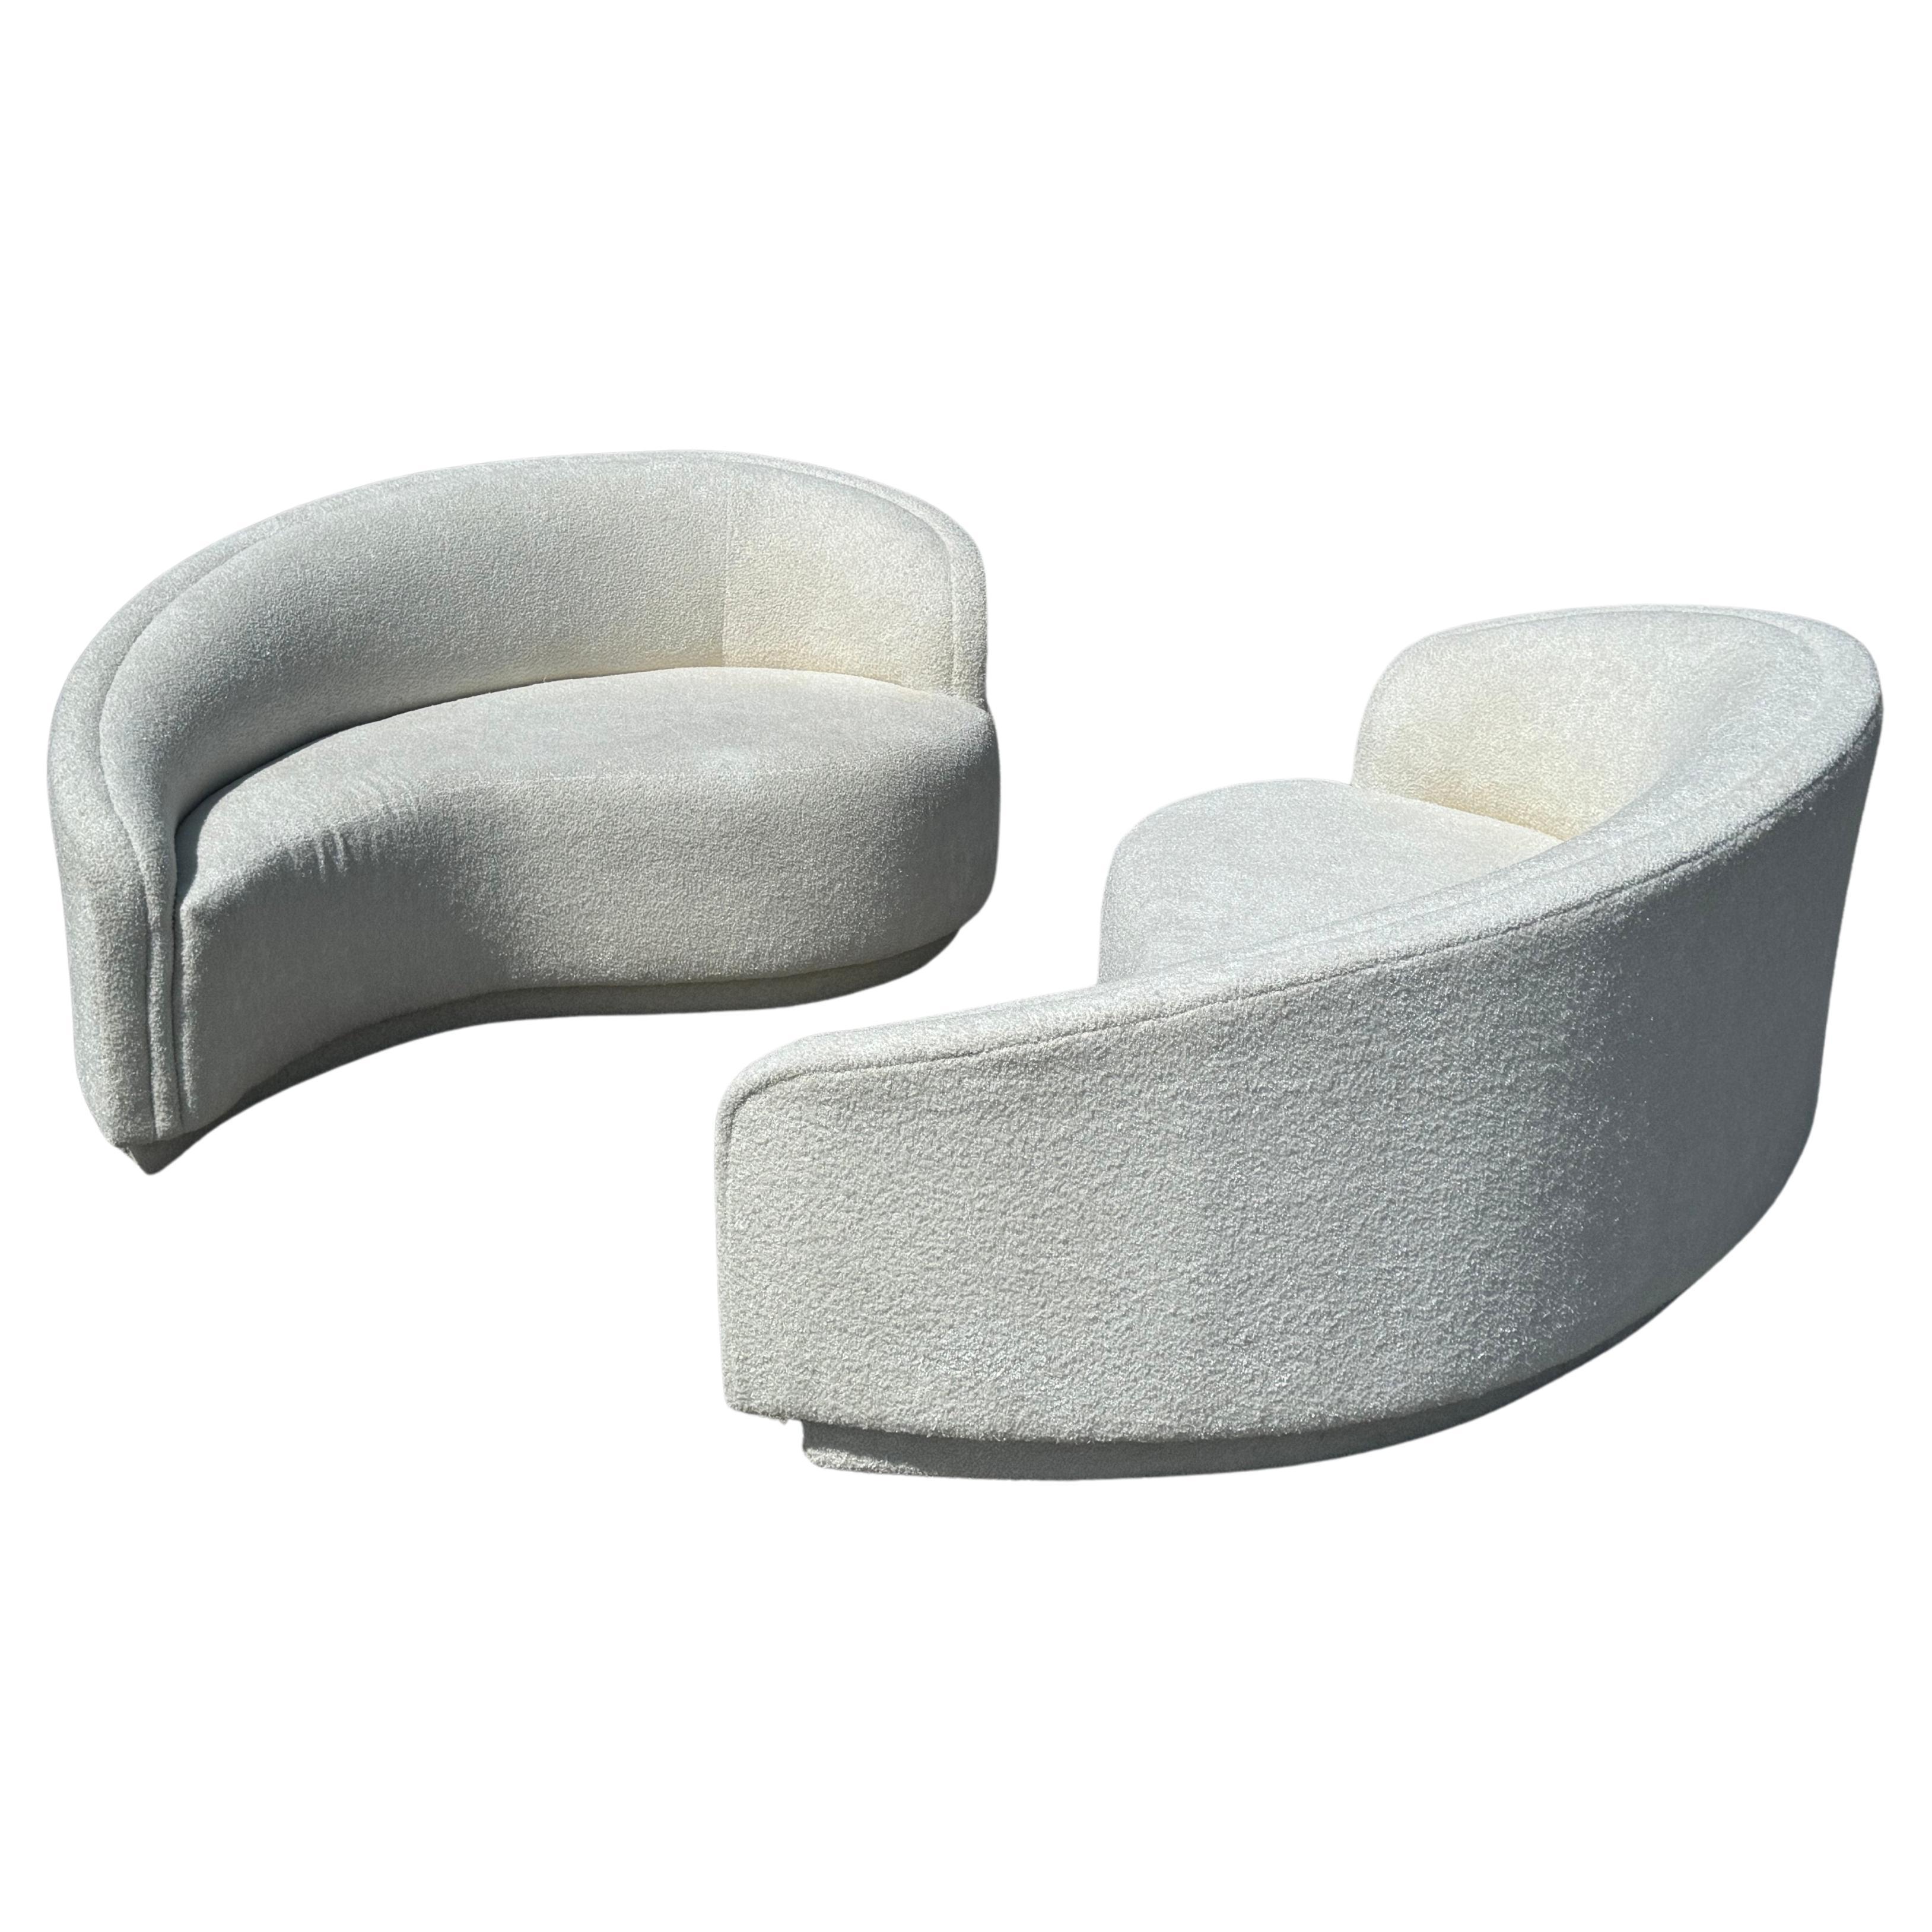 1980s Glamours Curved Sofa - Chaise by Vladimir Kagan for Weiman in White Bouclé In Good Condition For Sale In St. Louis, MO